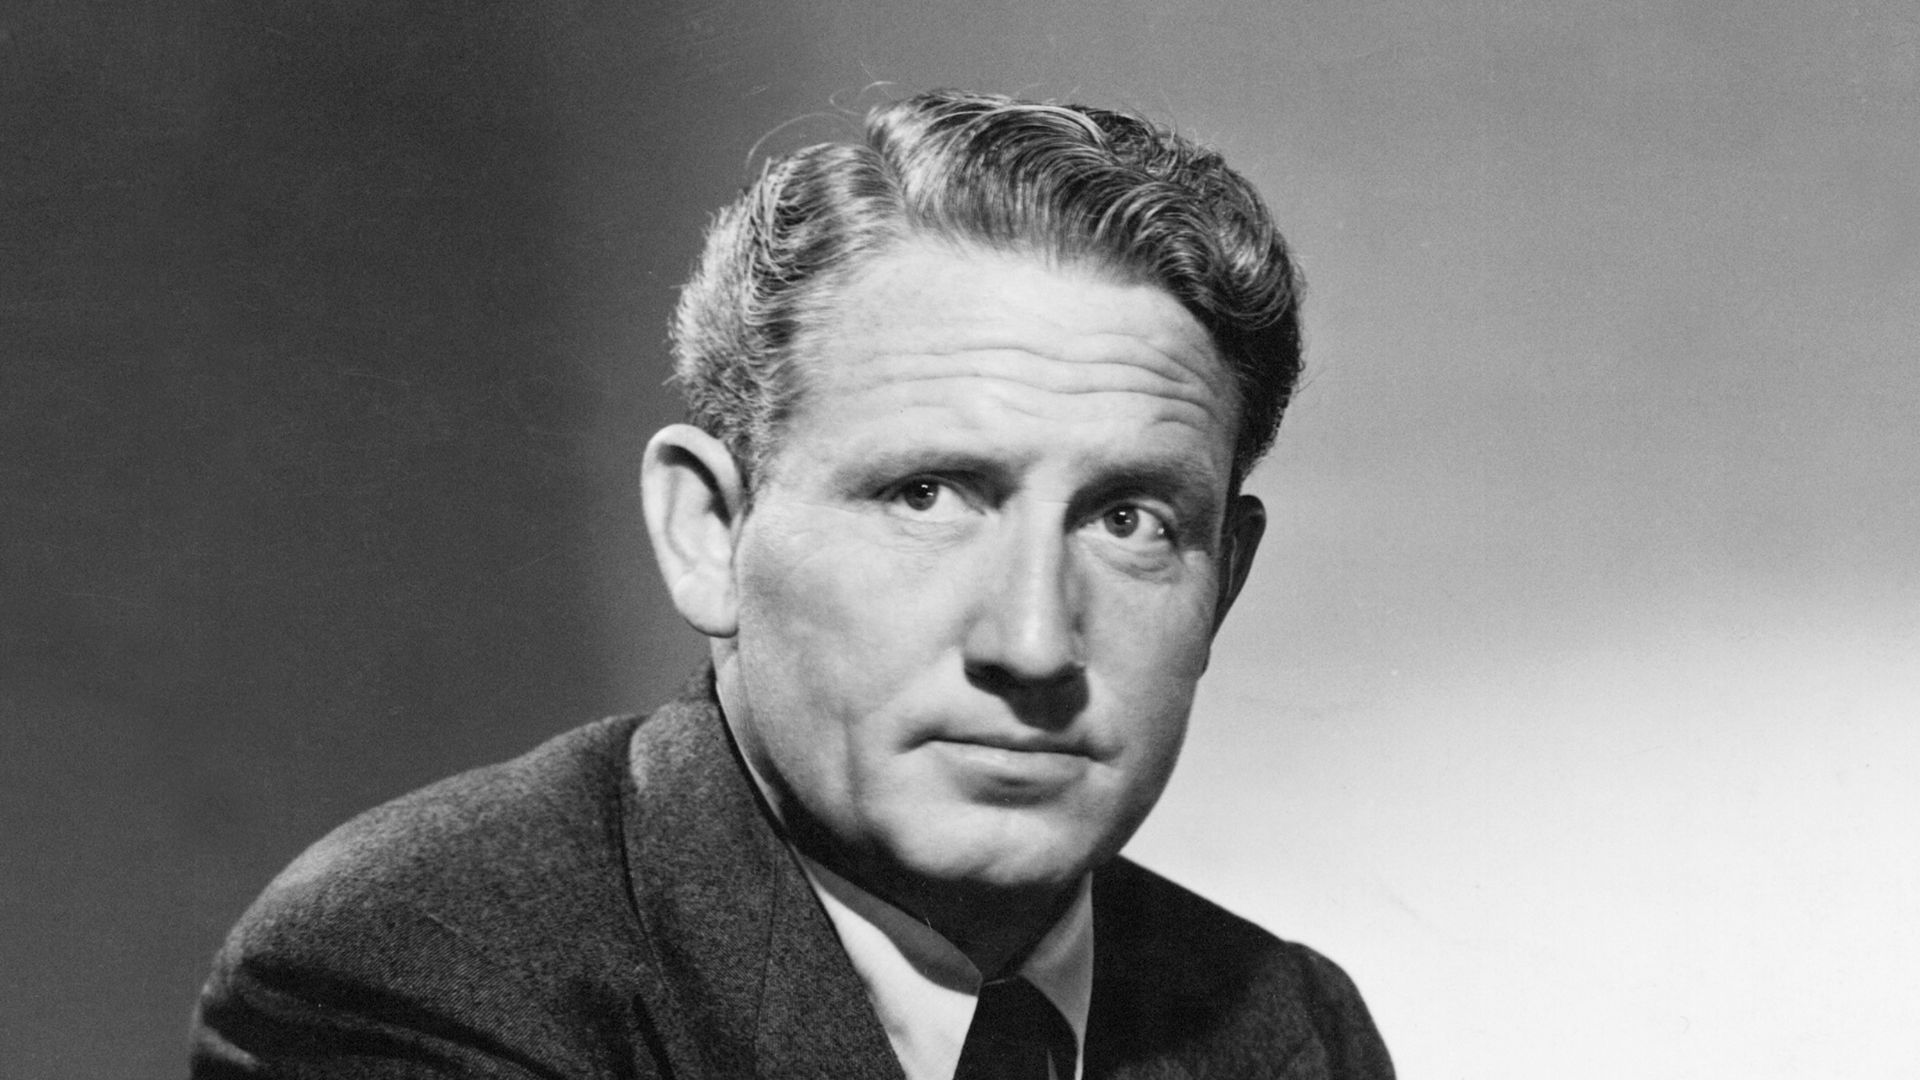 Spencer Tracy - A British Italo Disco Singer And Actress